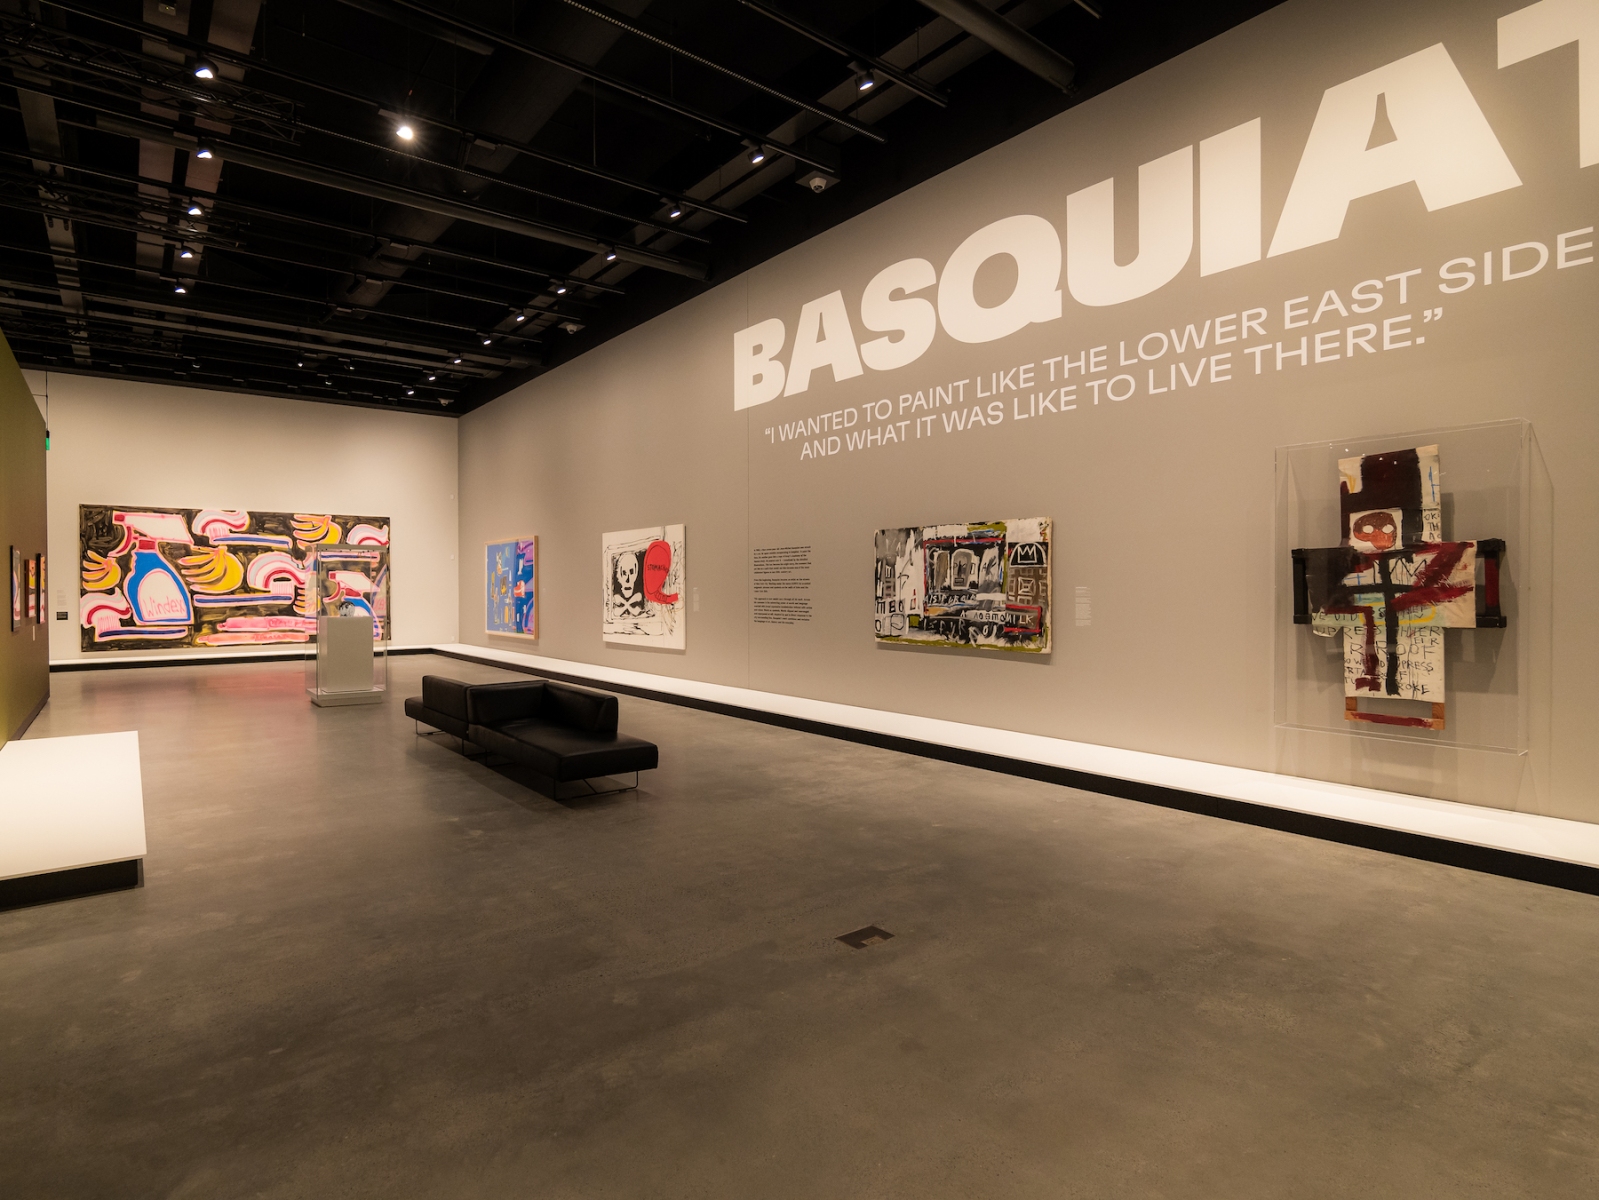 A gallery splashes the name Basquiat in large caps lock letters along a wall, underneath hang paintings by the artist